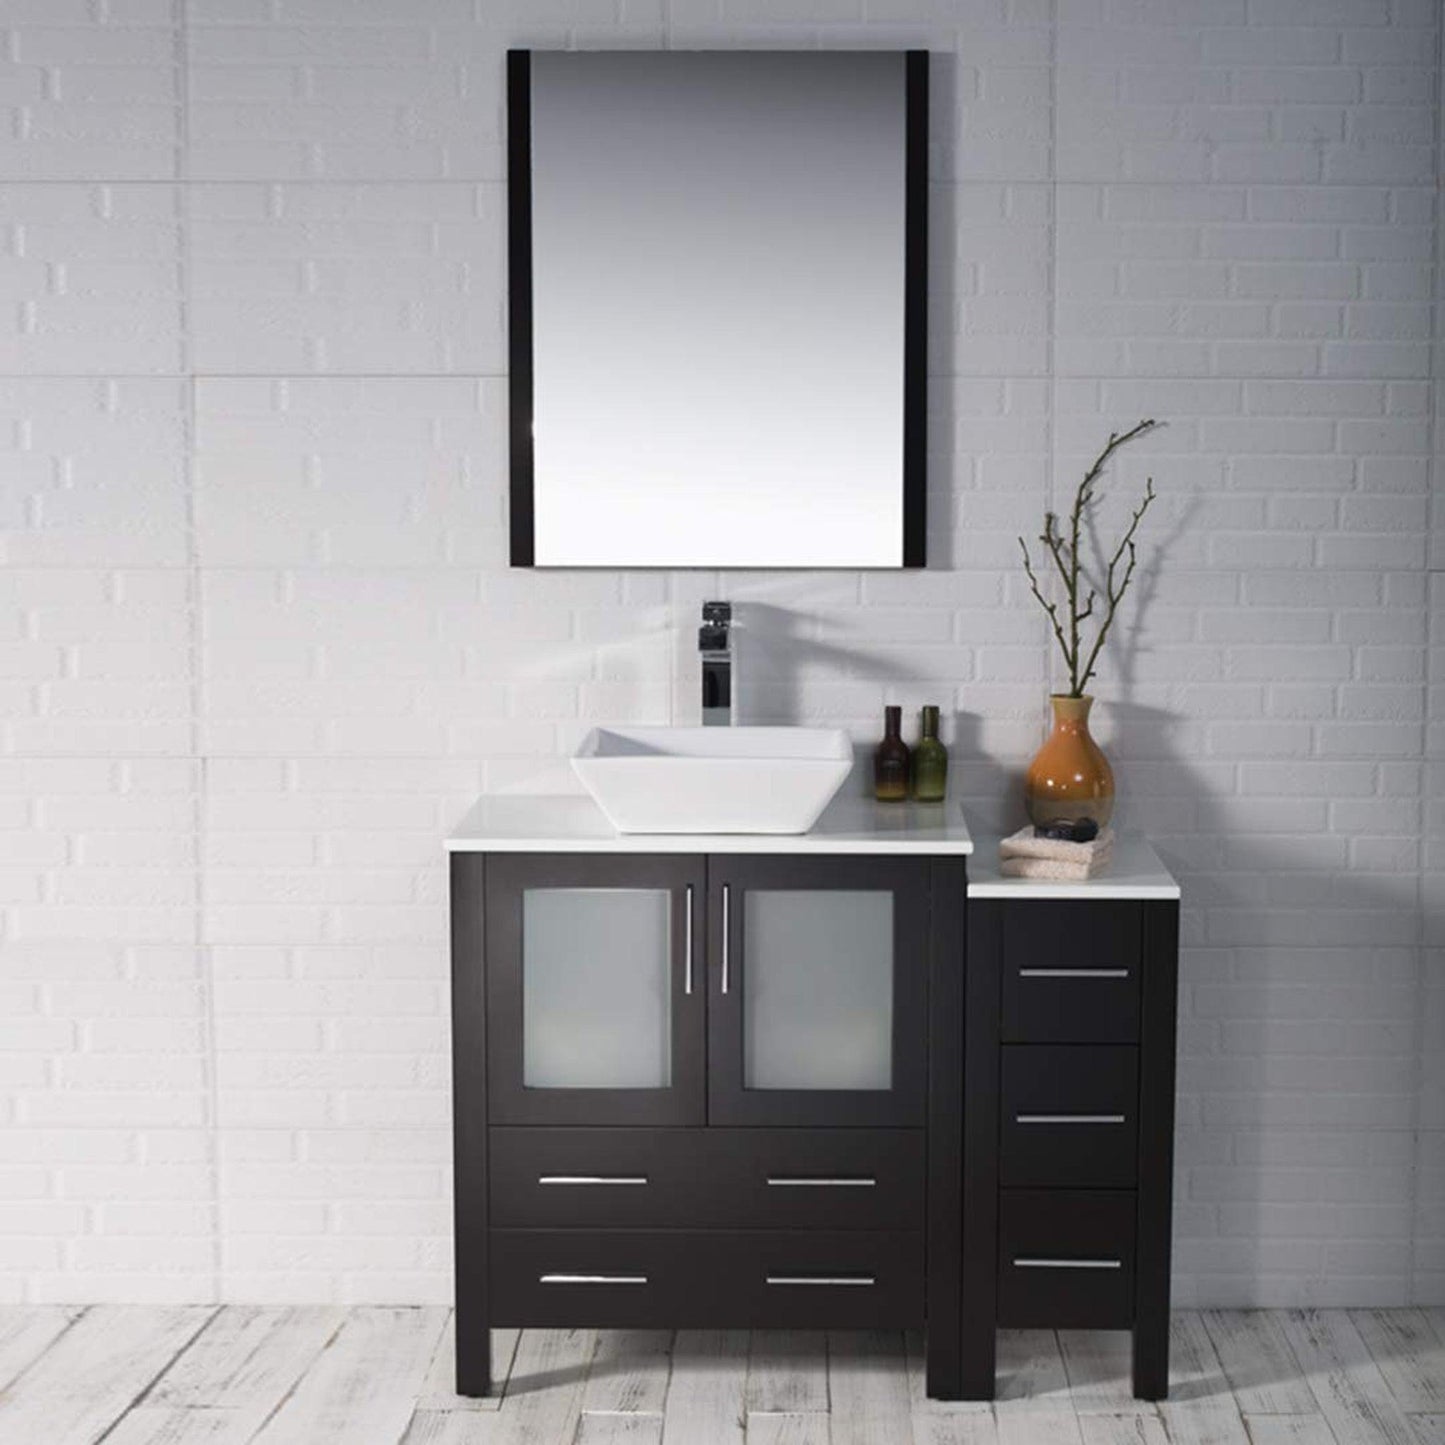 Blossom Sydney 42" Espresso Freestanding Vanity Set With Integrated Single Sink Ceramic Top, Mirror and Side Cabinet